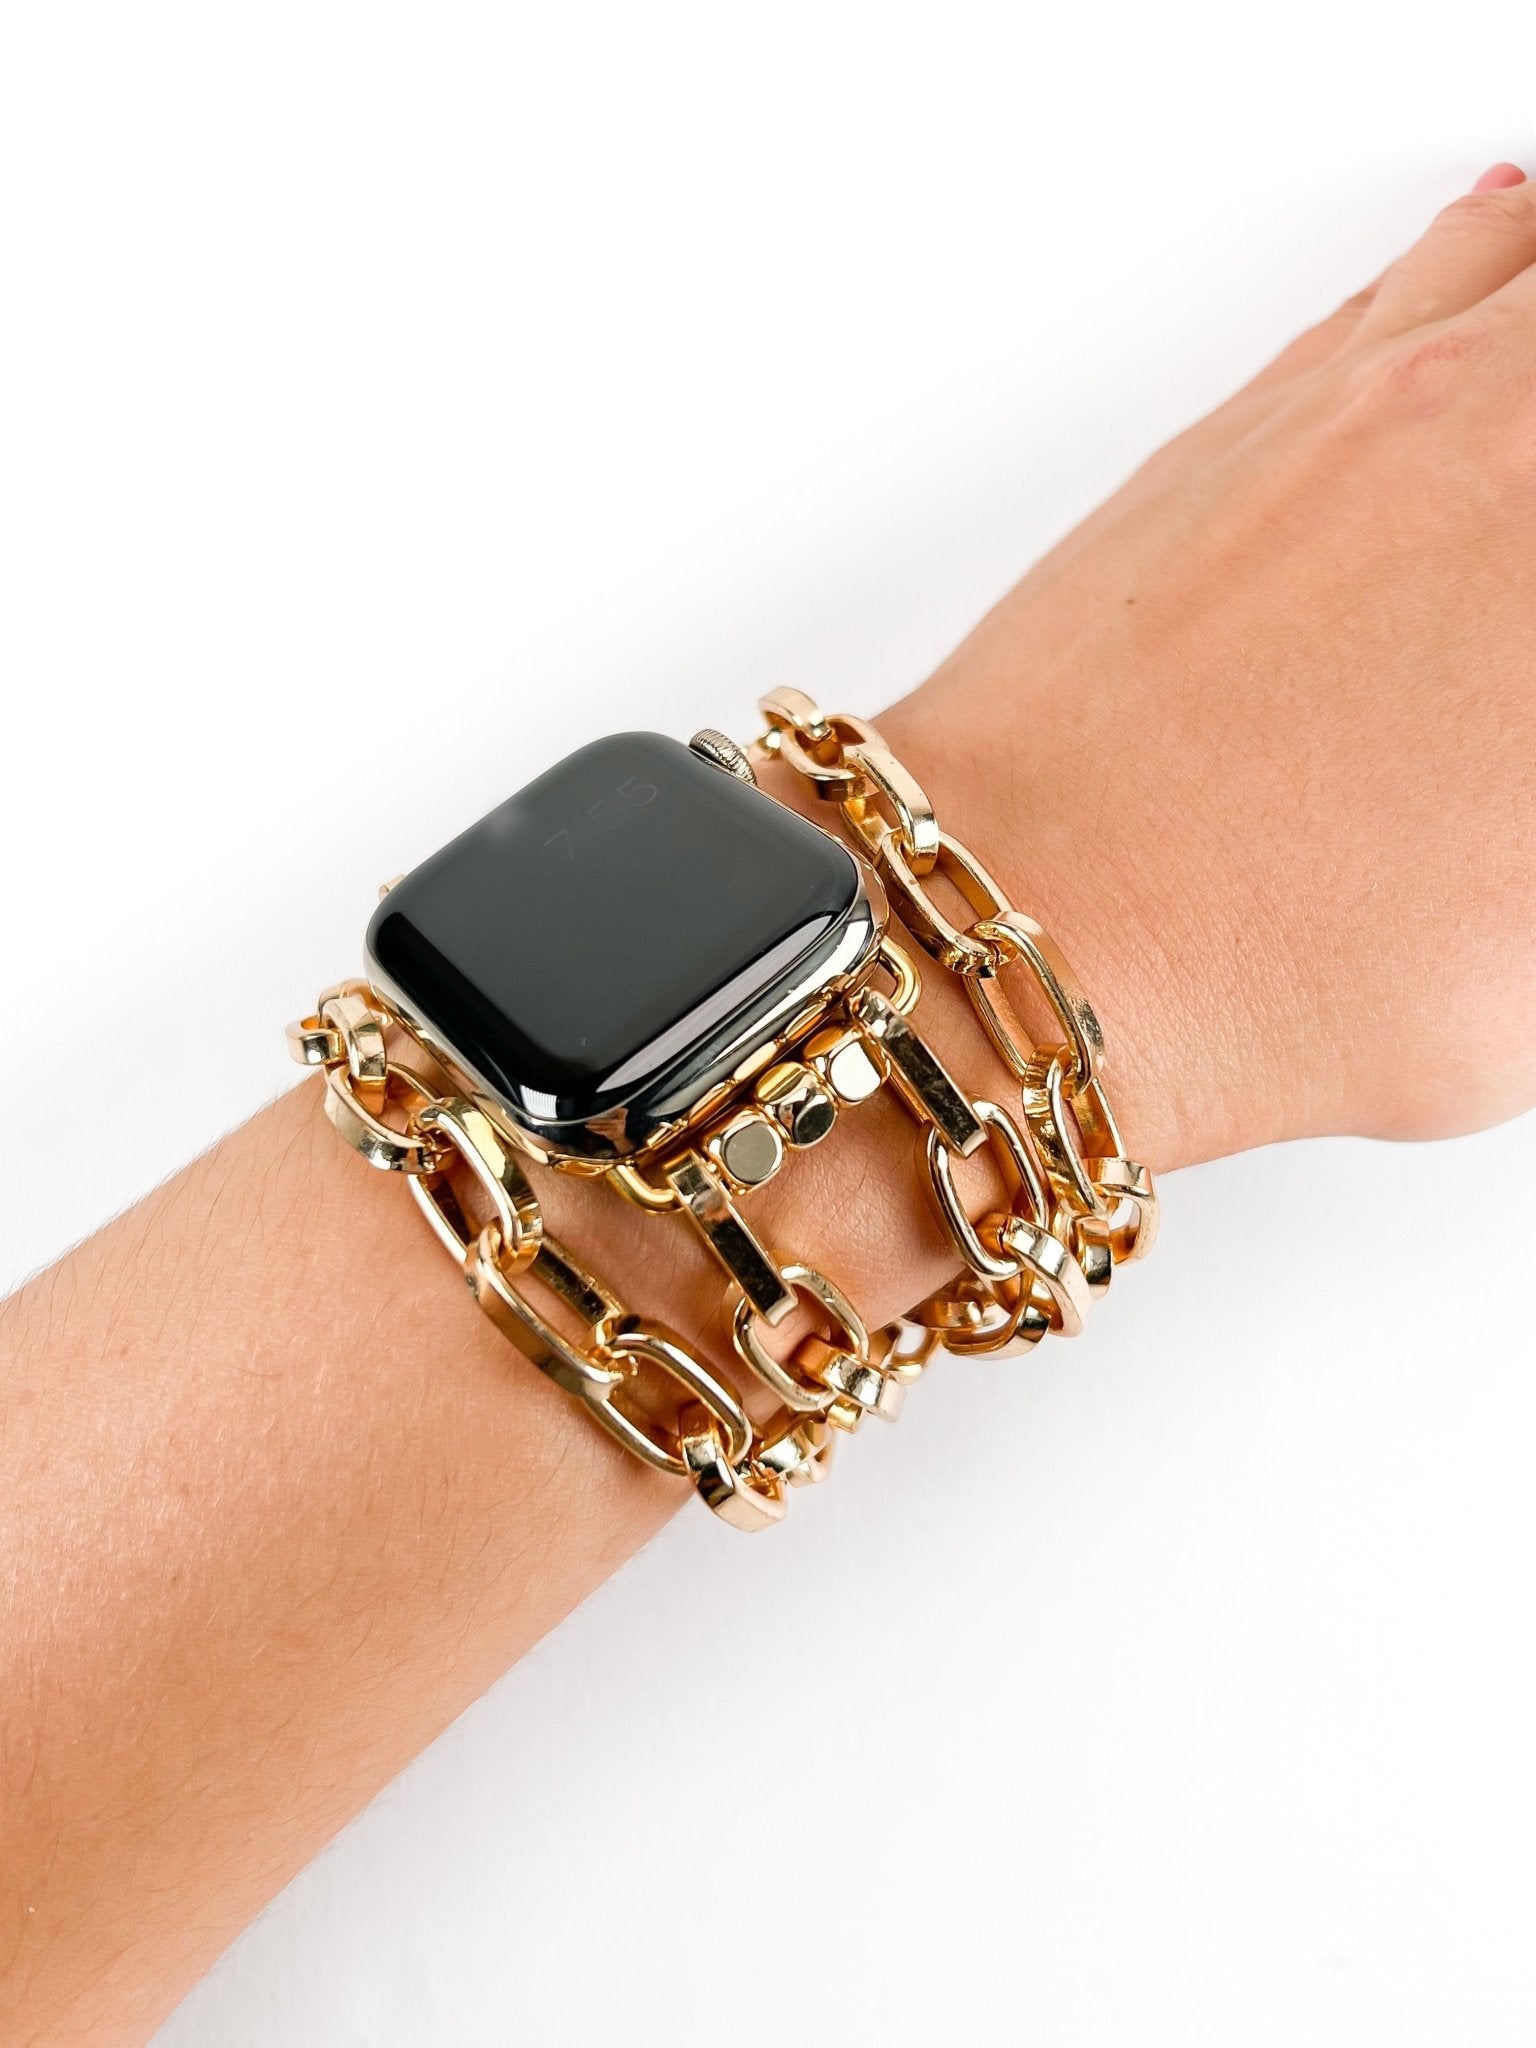 Gold Link Chain Watch Bracelet Band for Apple Watch - Mareevo